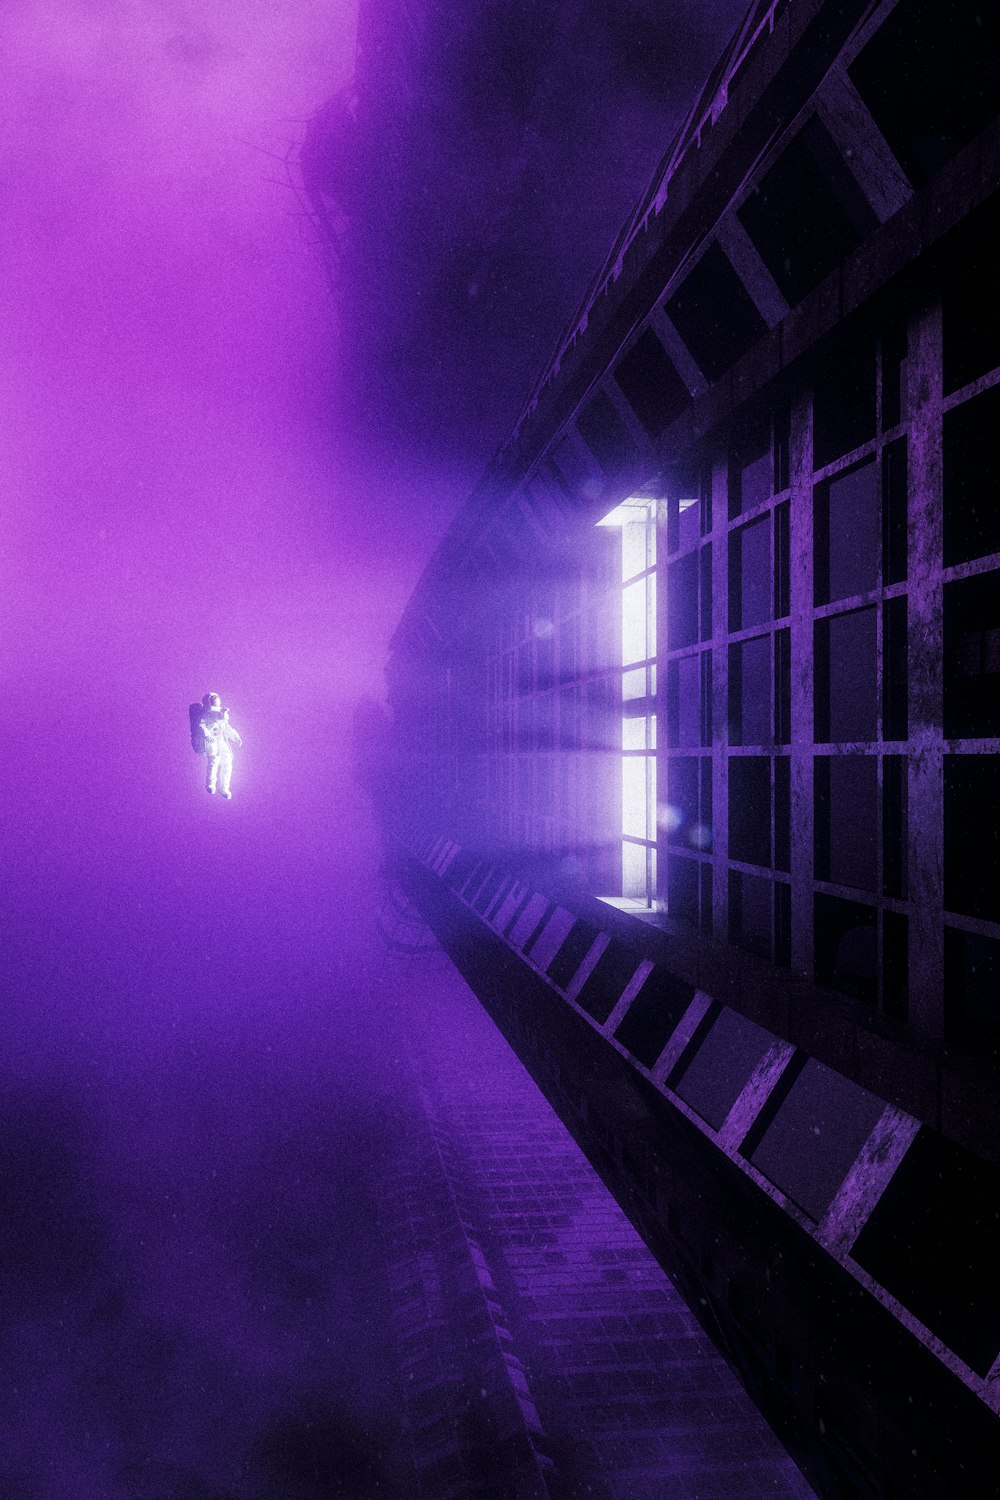 a person standing on a walkway in a foggy area